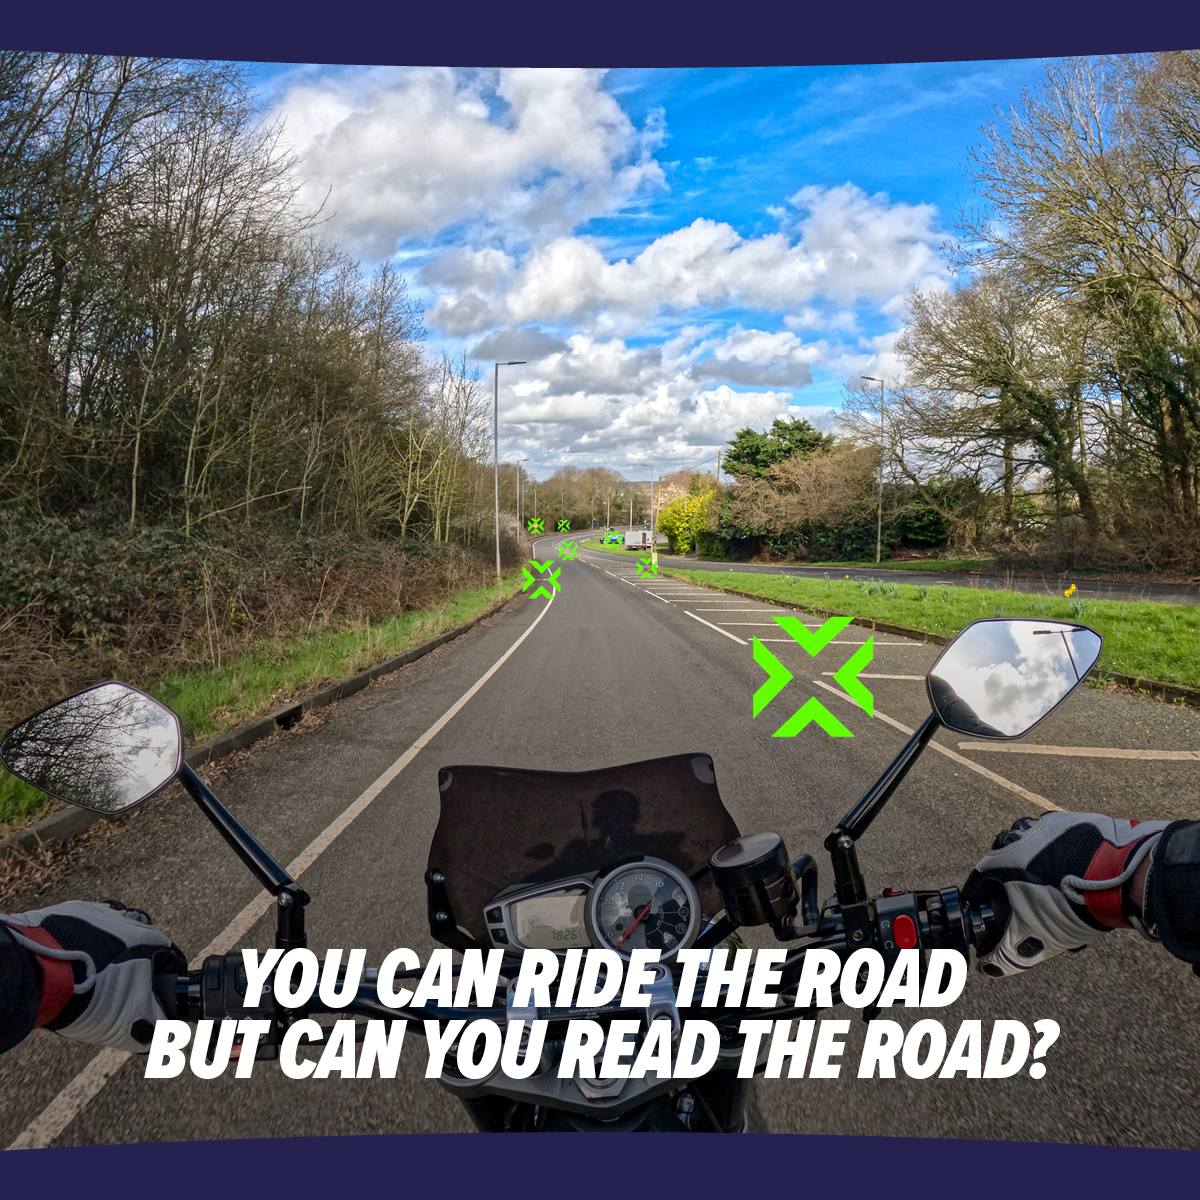 Around six motorcyclists die and 111 are seriously injured on UK roads each week. Ride Craft encourages better and safer riding through sharing the expertise of the nation’s best riders. 🏍️ For more information, please visit the Ride Craft Hub ➡️ ridecrafthub.org